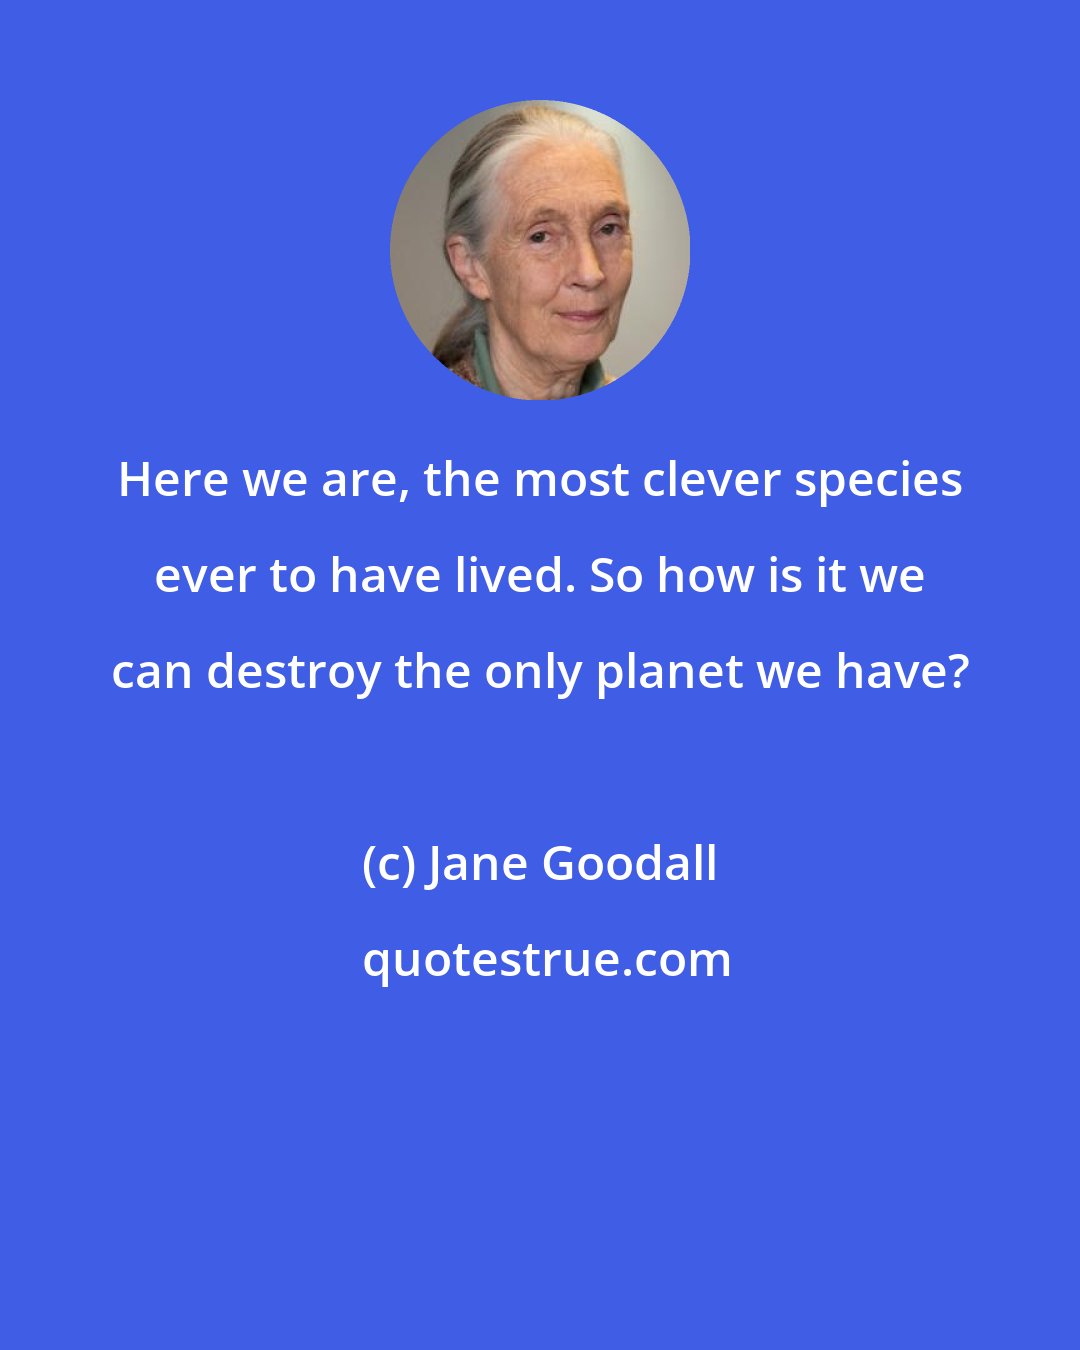 Jane Goodall: Here we are, the most clever species ever to have lived. So how is it we can destroy the only planet we have?